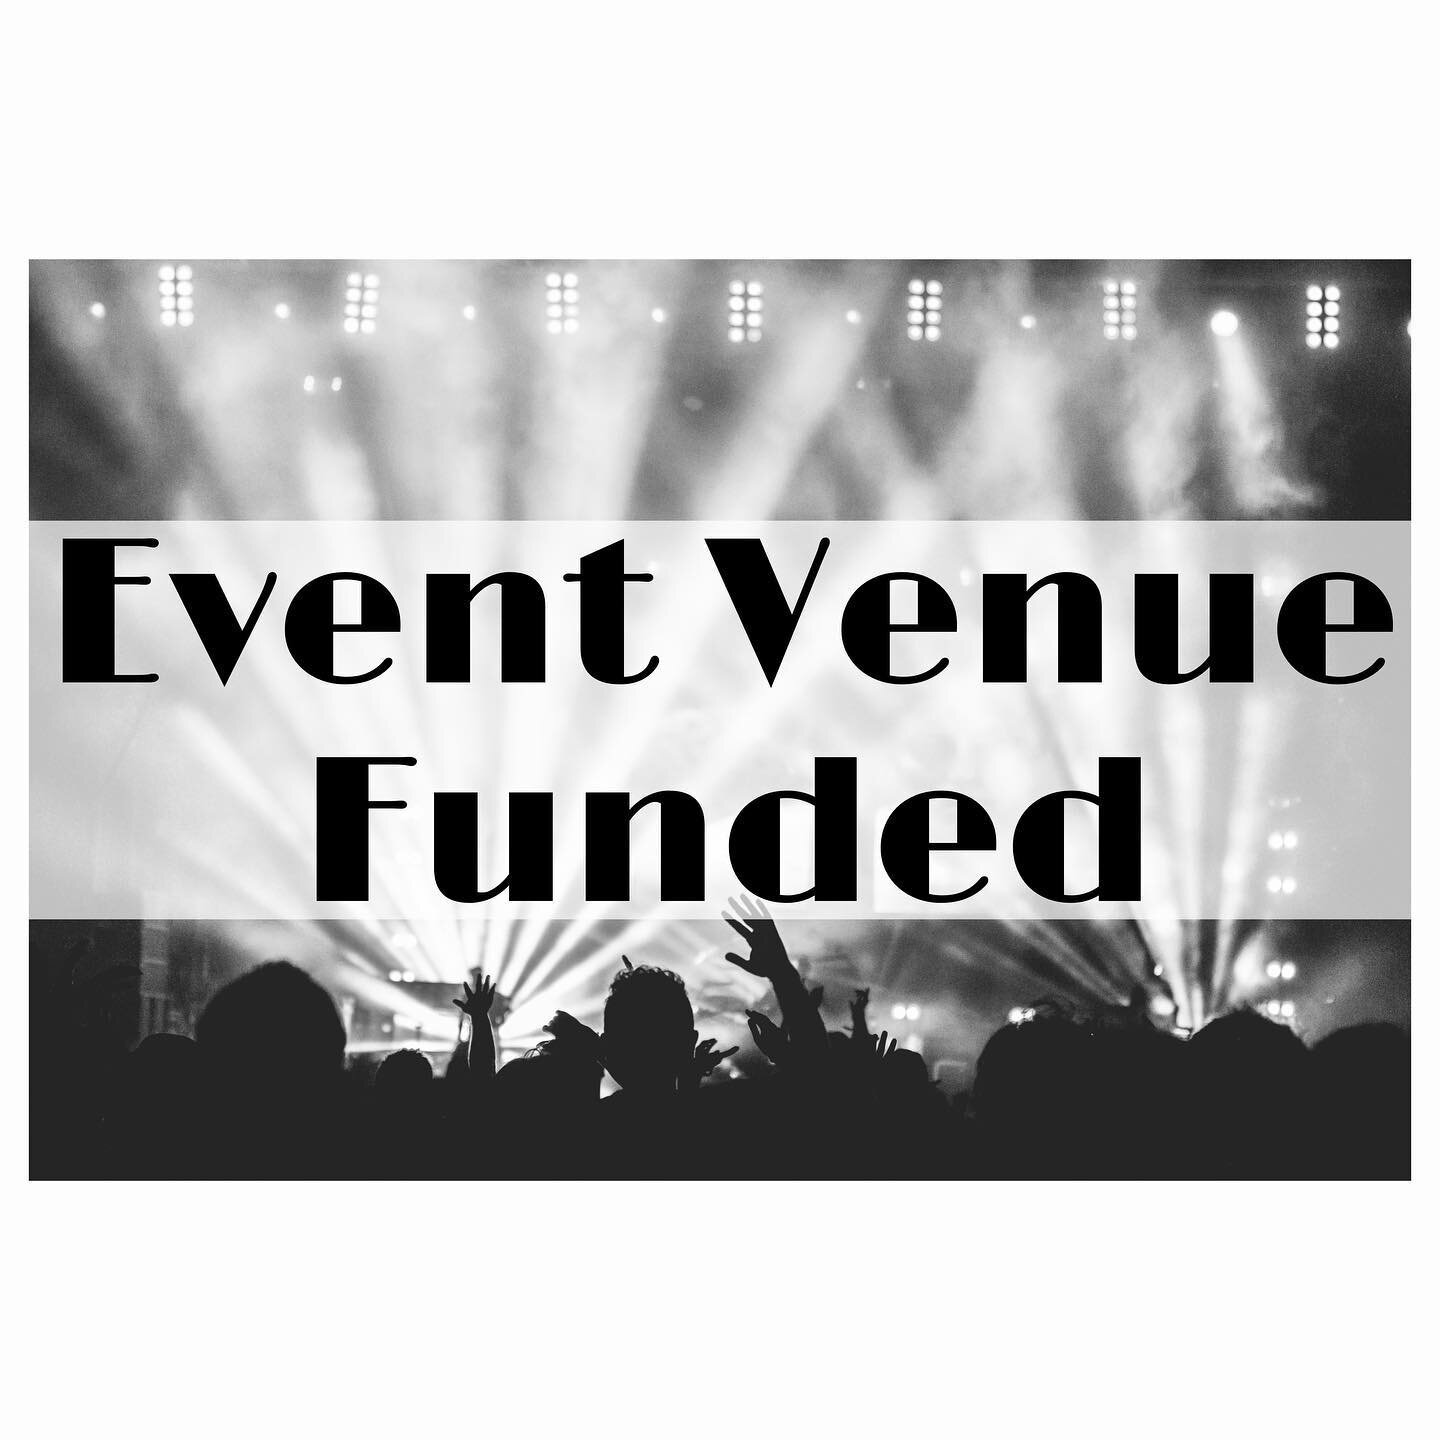 New sound gear funded for event venue!
#venue #smallbusiness #sales #audiovisual